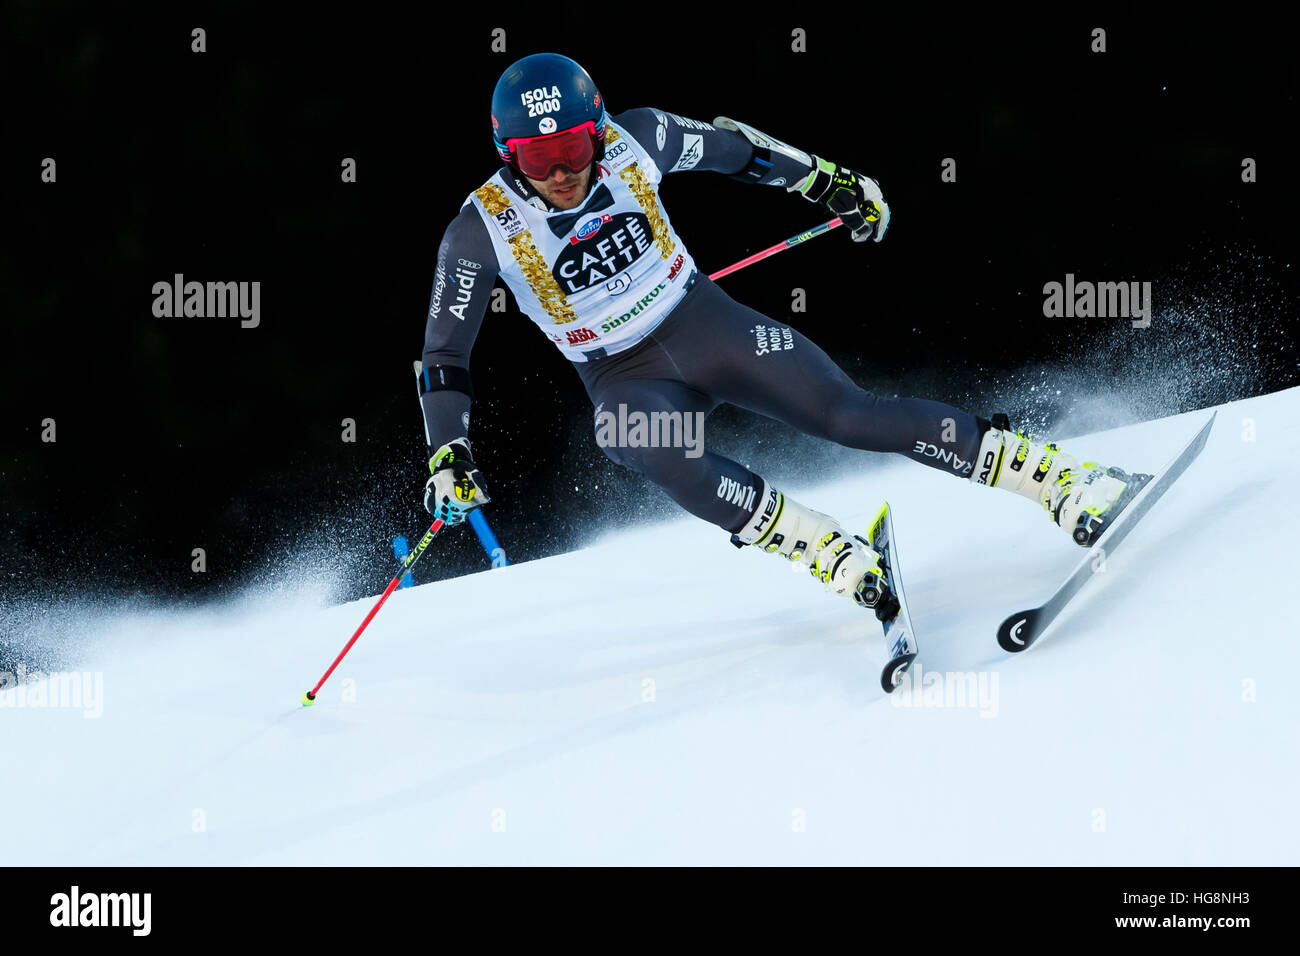 Alta Badia, Italy 18 December 2016: FAIVRE Mathieu (Fra)  takes 2nd place during the Audi Fis Alpine Skiing World Cup Men’s Giant Slalom Race Stock Photo